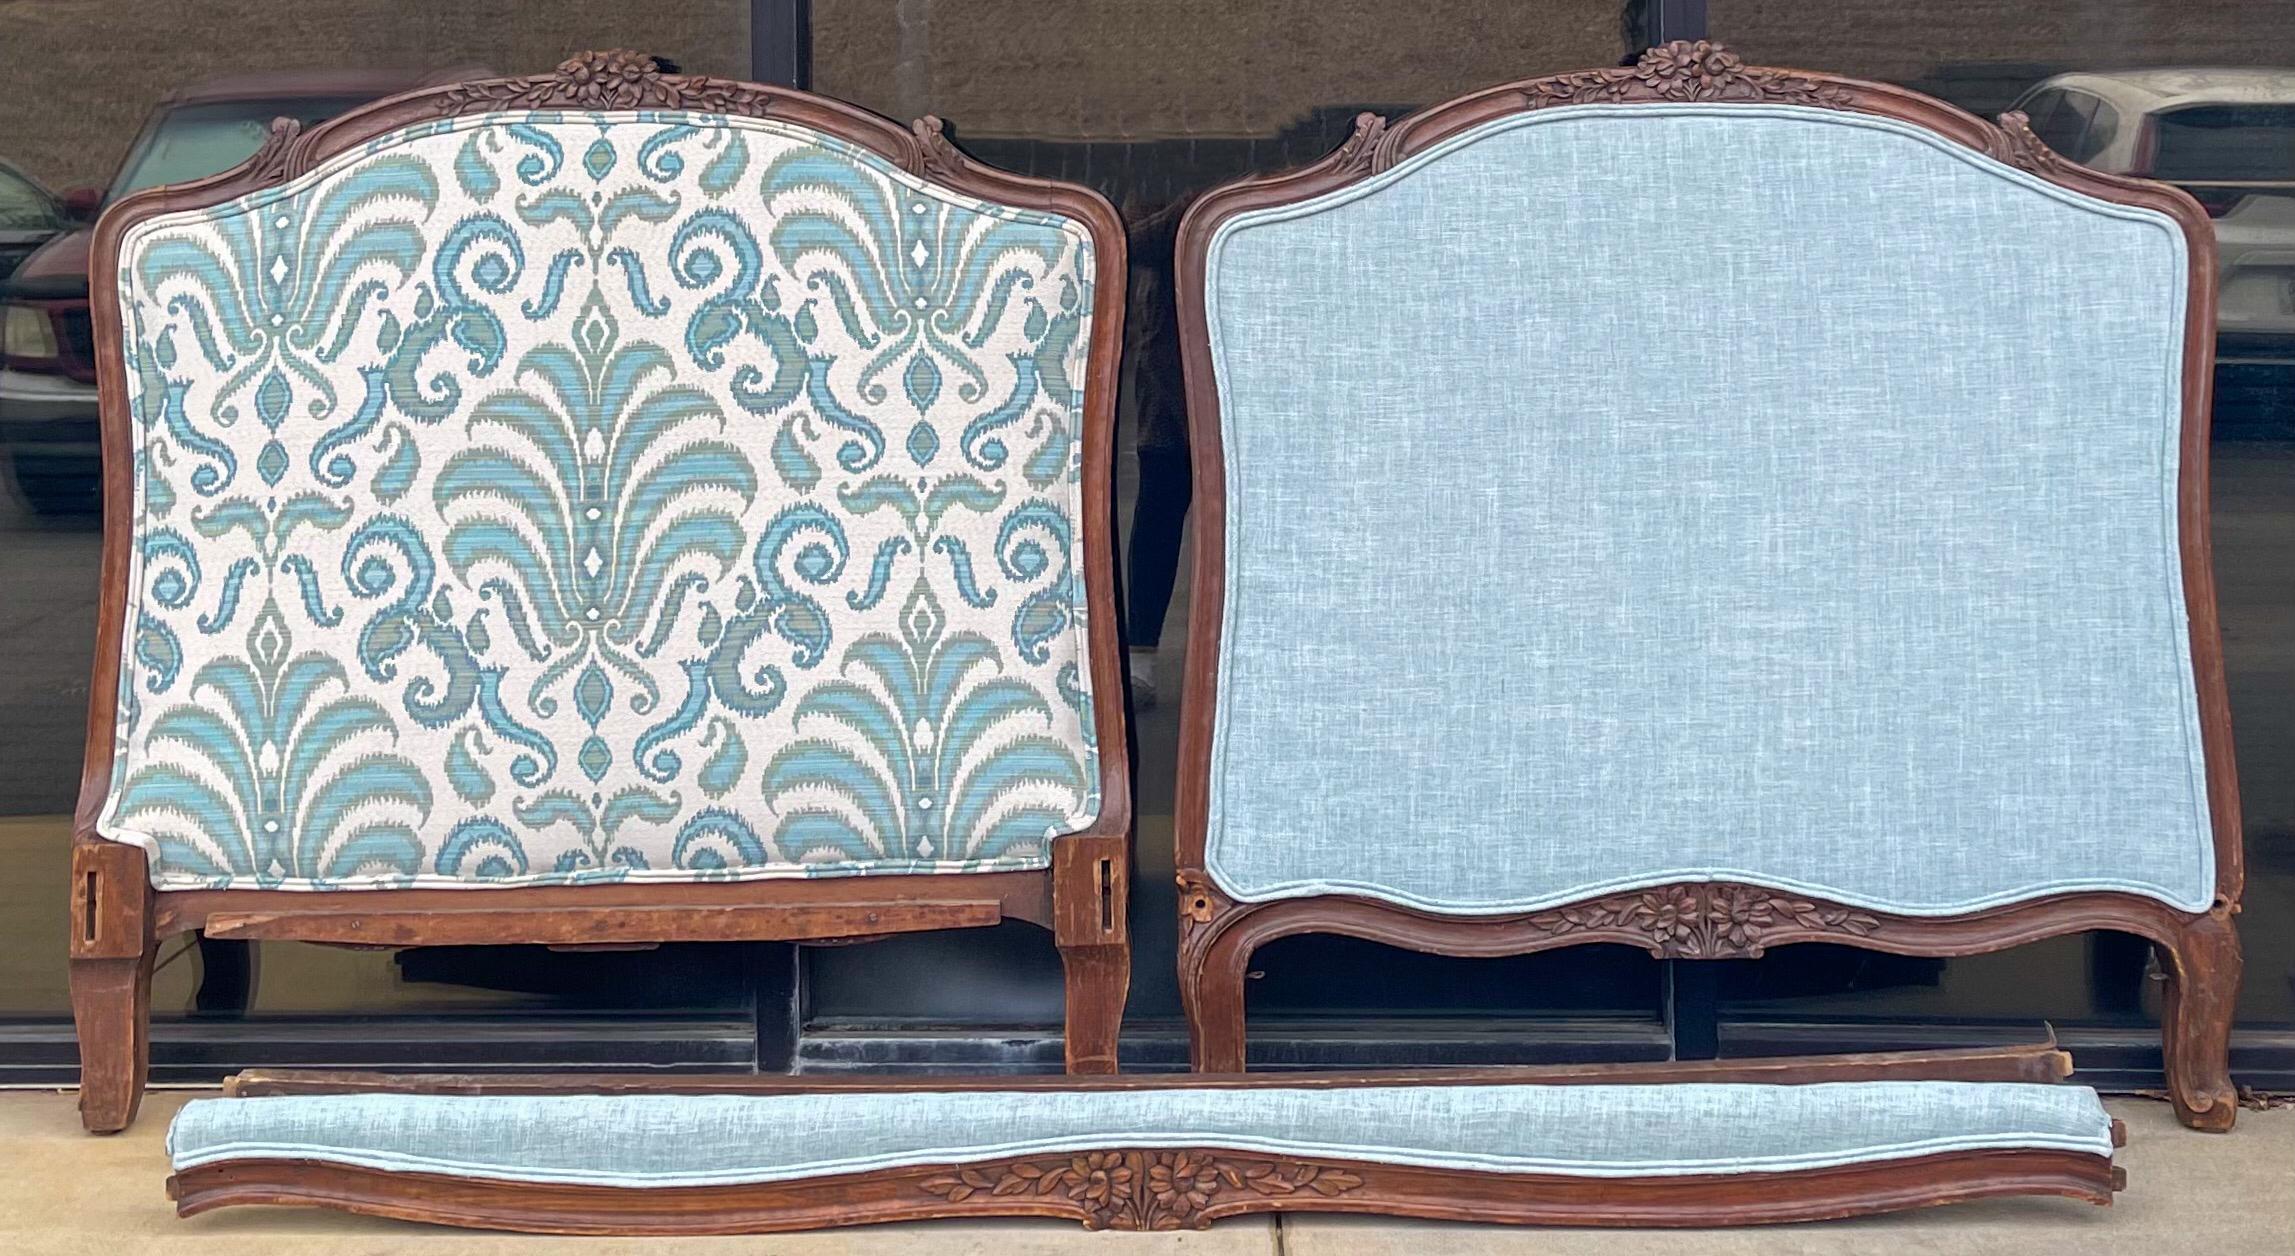 Upholstery Early 20th-C. French Carved Oak Daybed or Twin Headboards in Turquoise